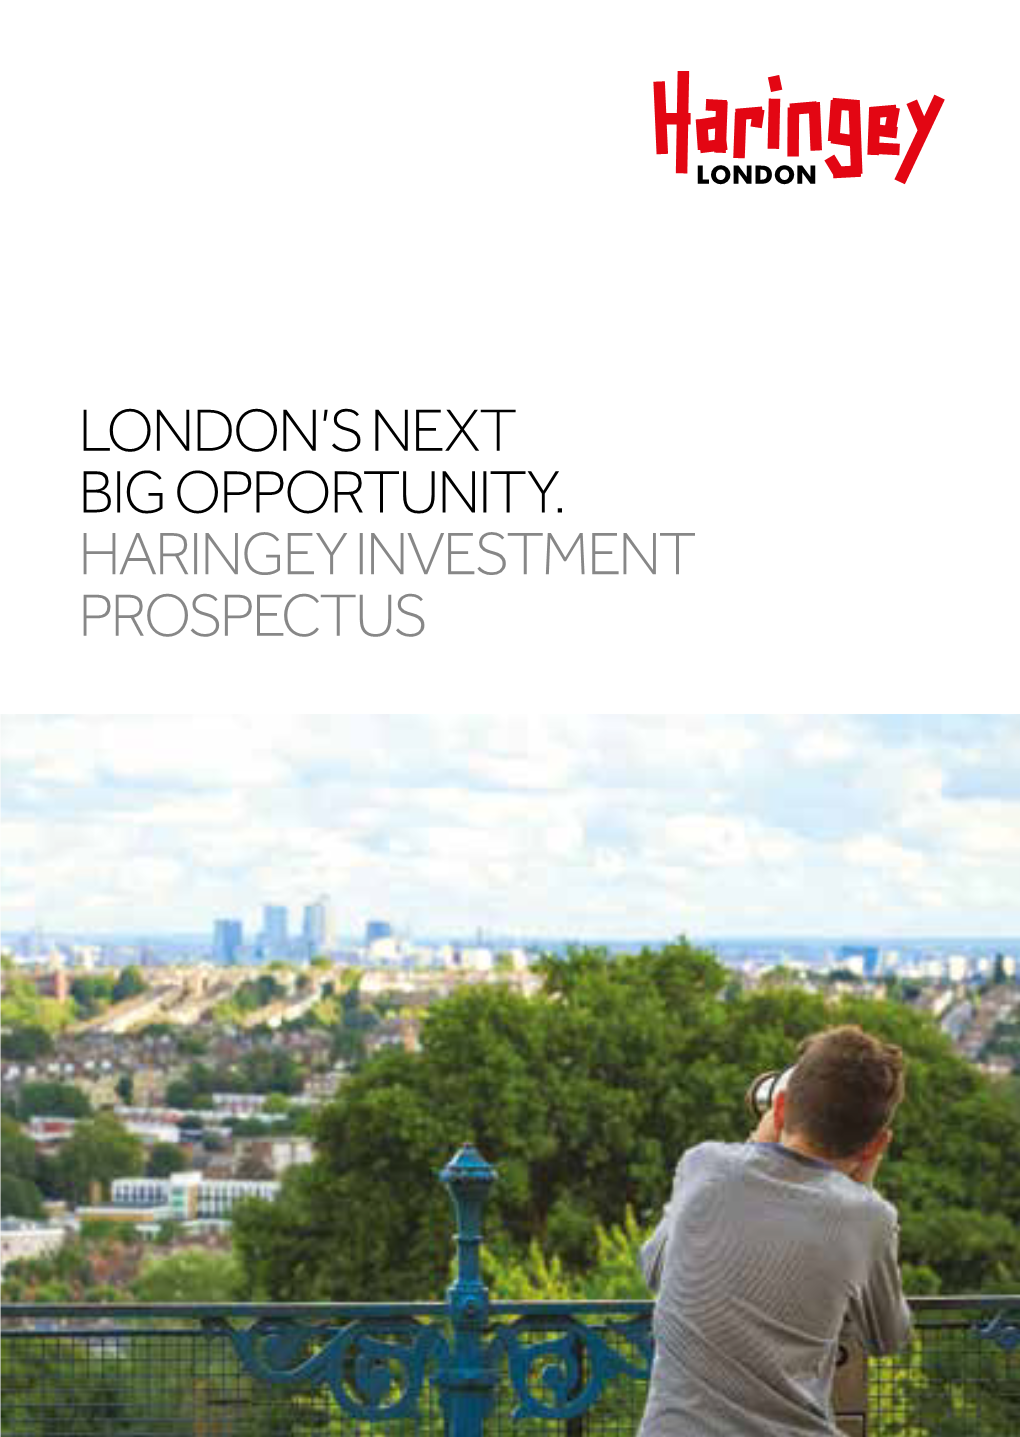 HARINGEY INVESTMENT PROSPECTUS HARINGEY IS the FUTURE of LONDON 10 Minutes to Central London by Tube LONDON’S NEXT BIG GROWTH OPPORTUNITY